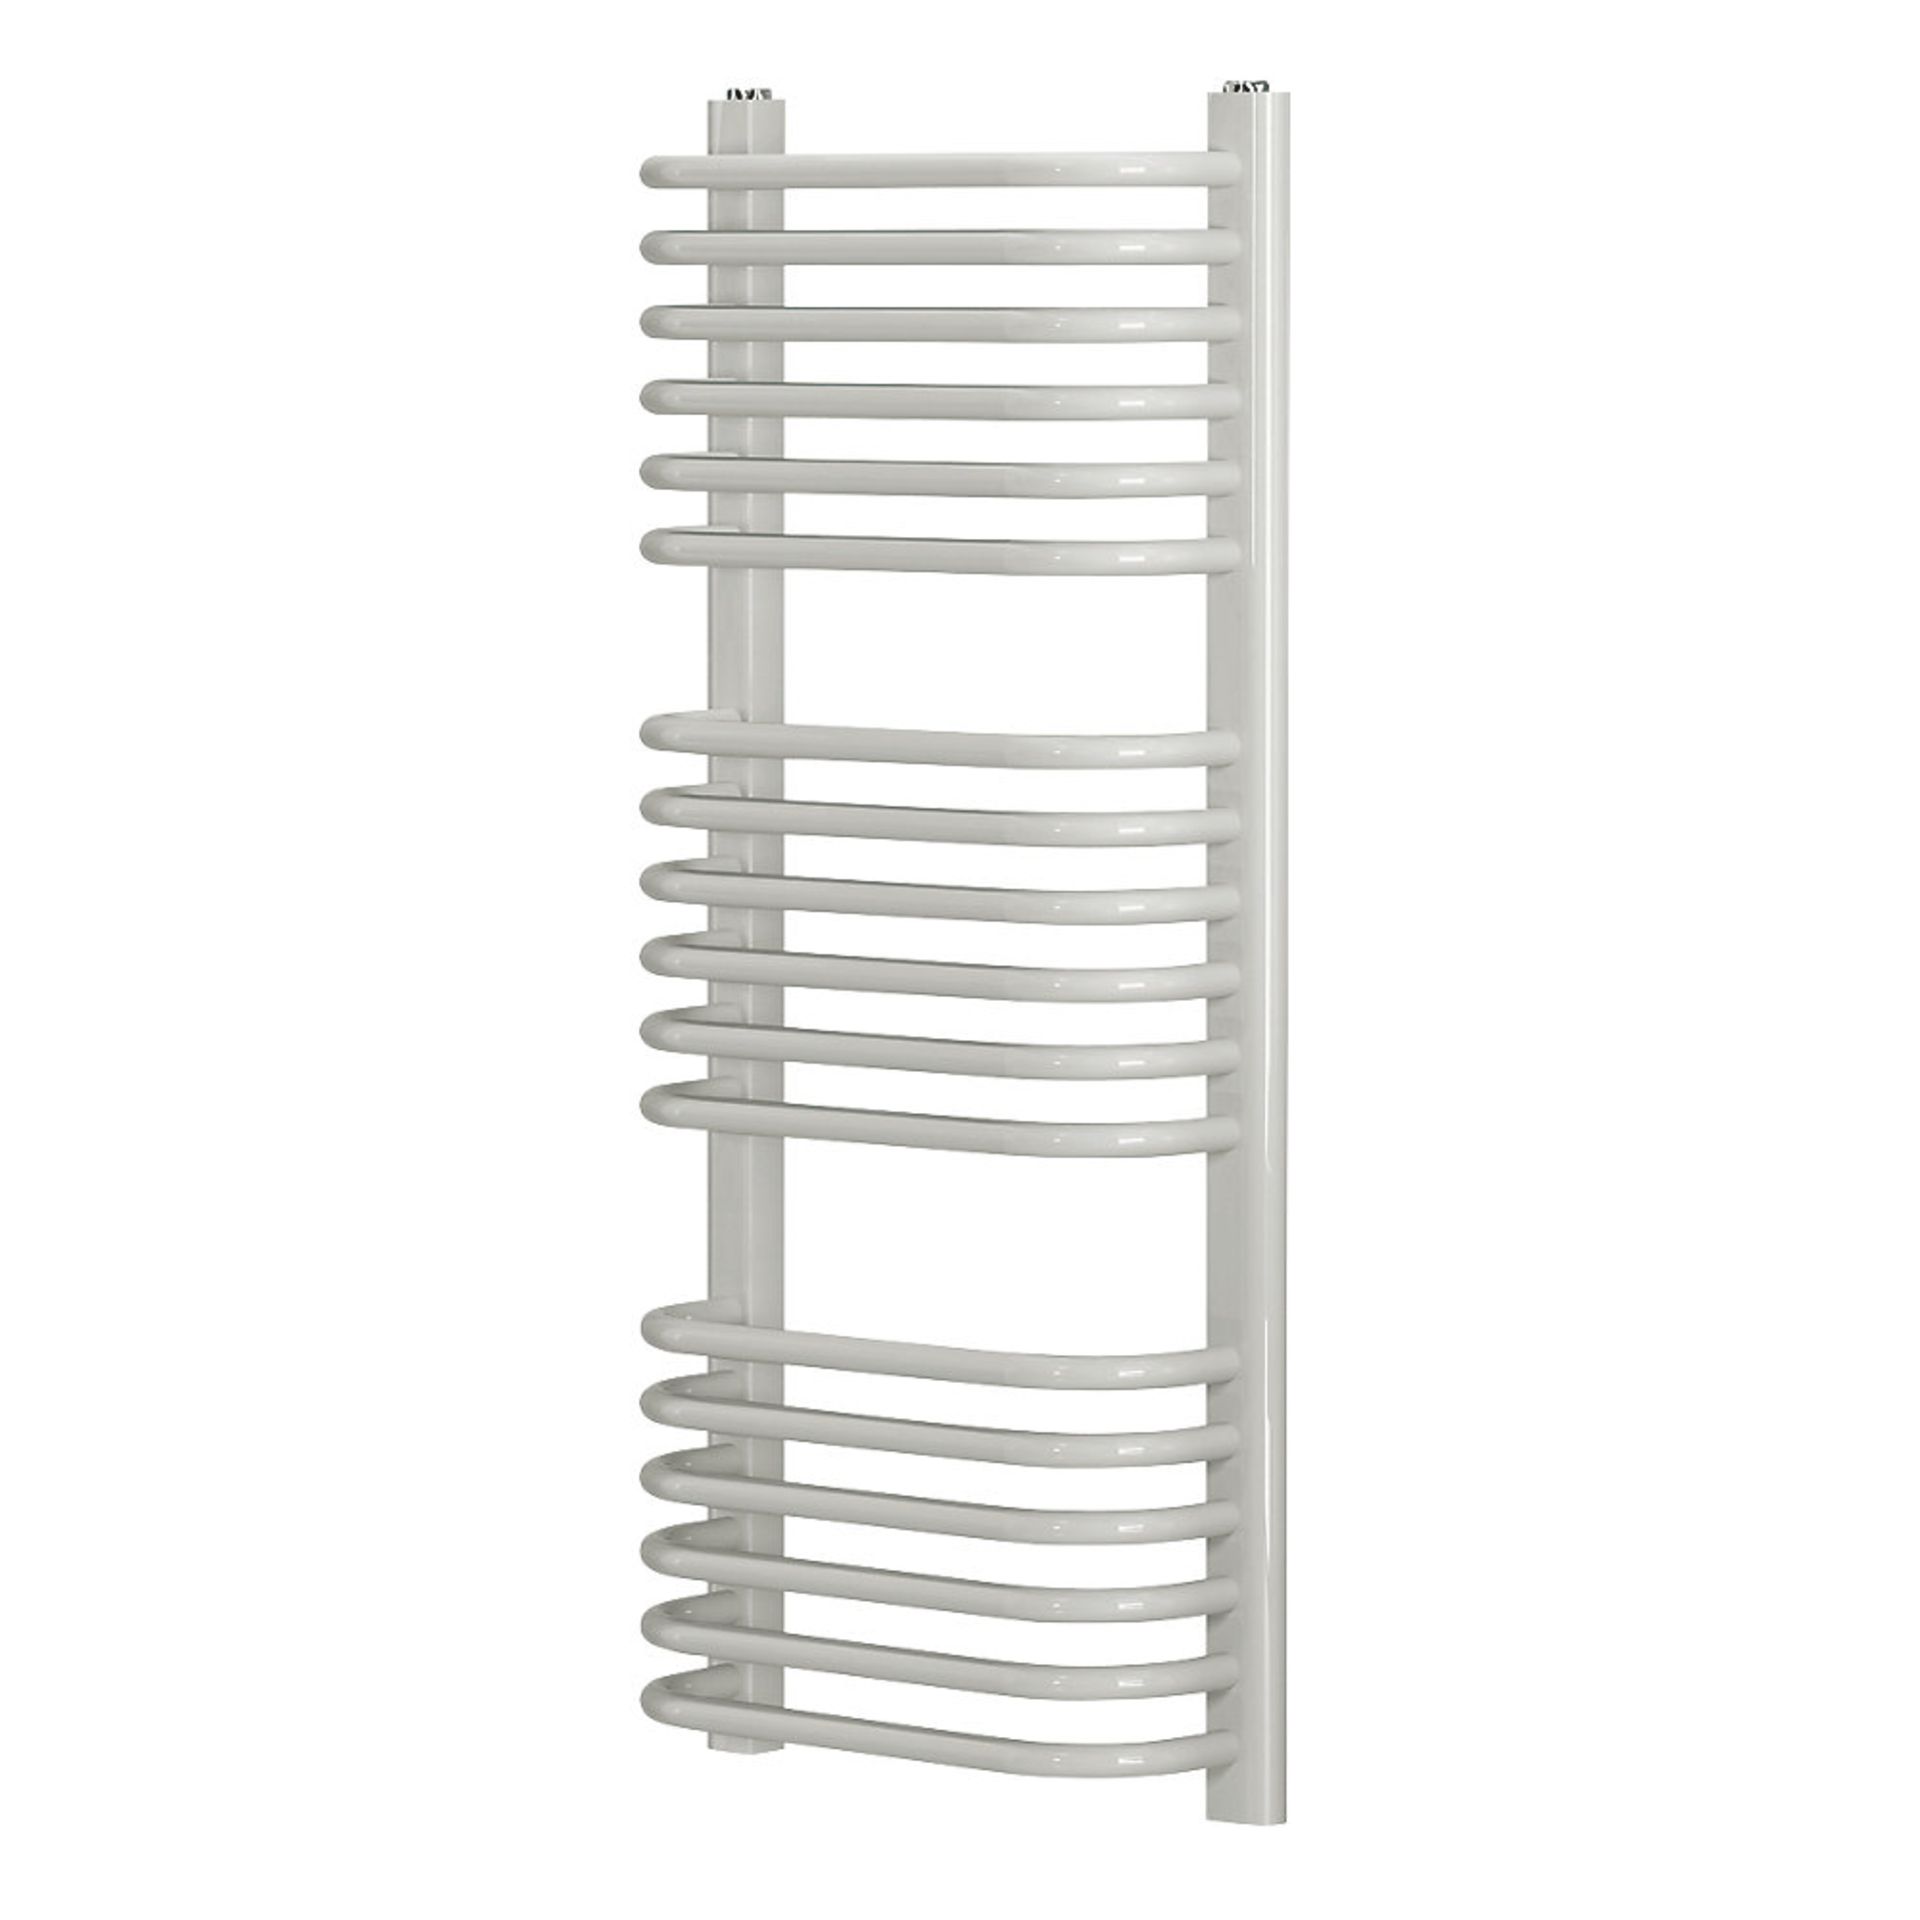 New (G56) 900x400mm White Curved D-Bar Towel Radiator. High Quality Powder-Coated Steel Constr... - Image 2 of 2